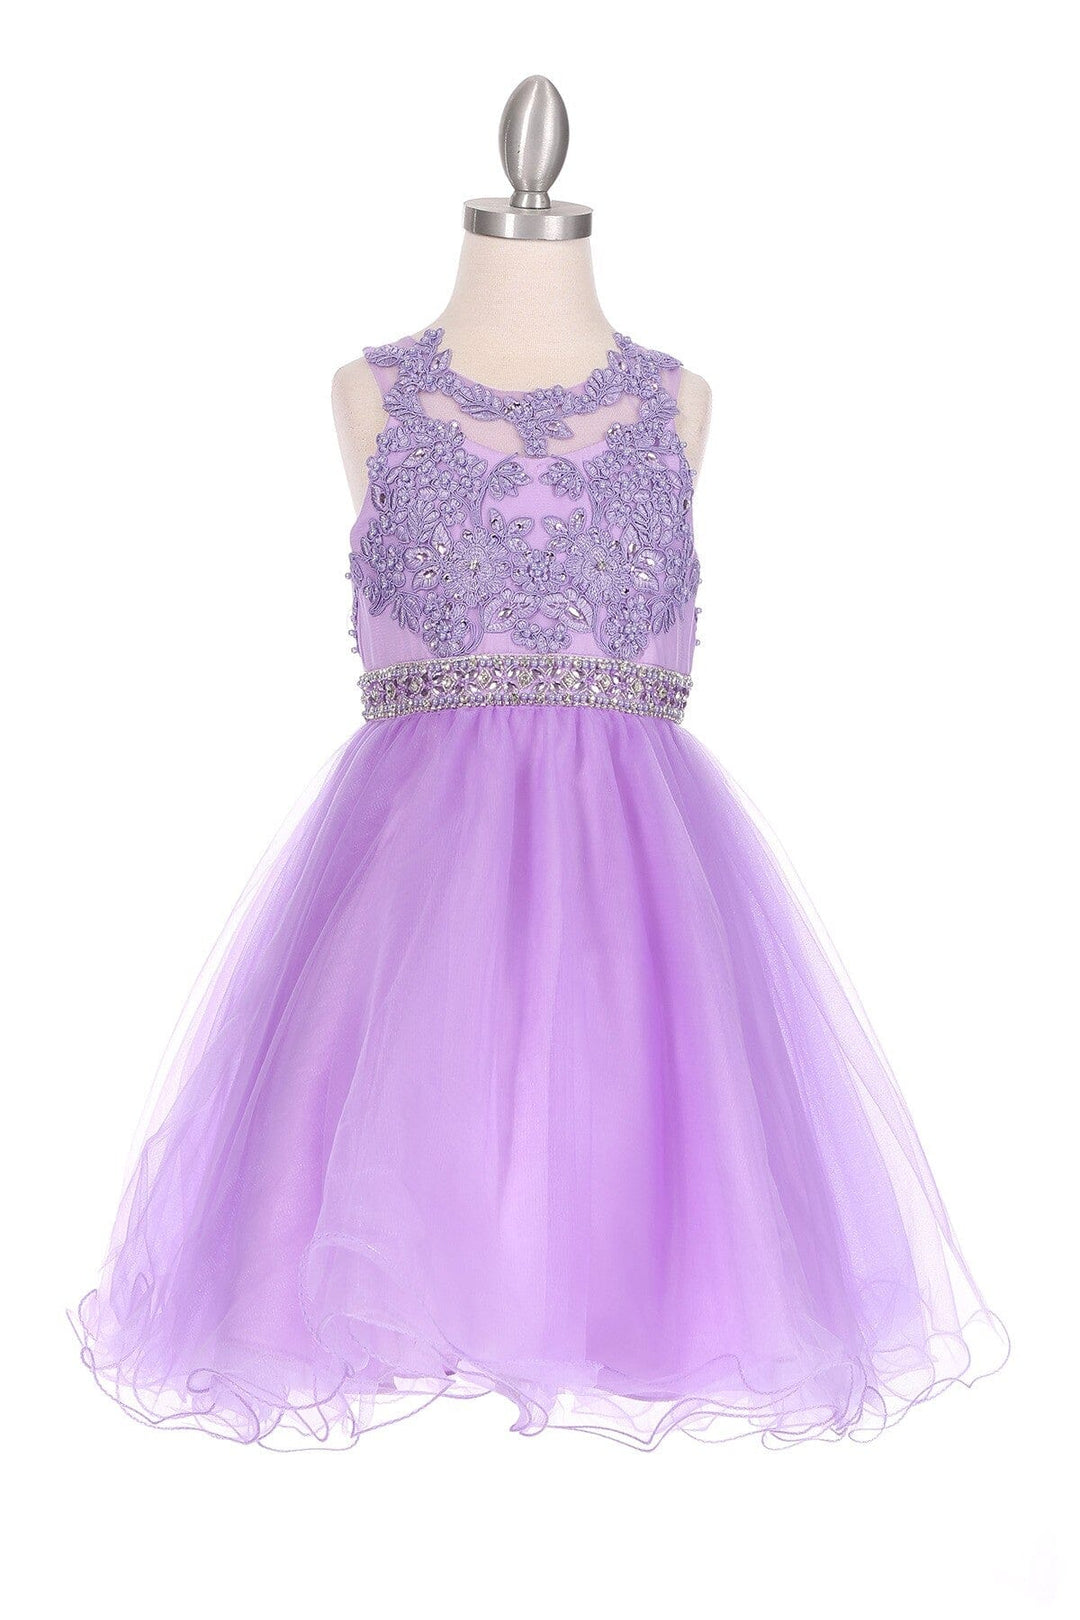 Girls Short Ruffled Dress with Beaded Bodice by Cinderella Couture 5013